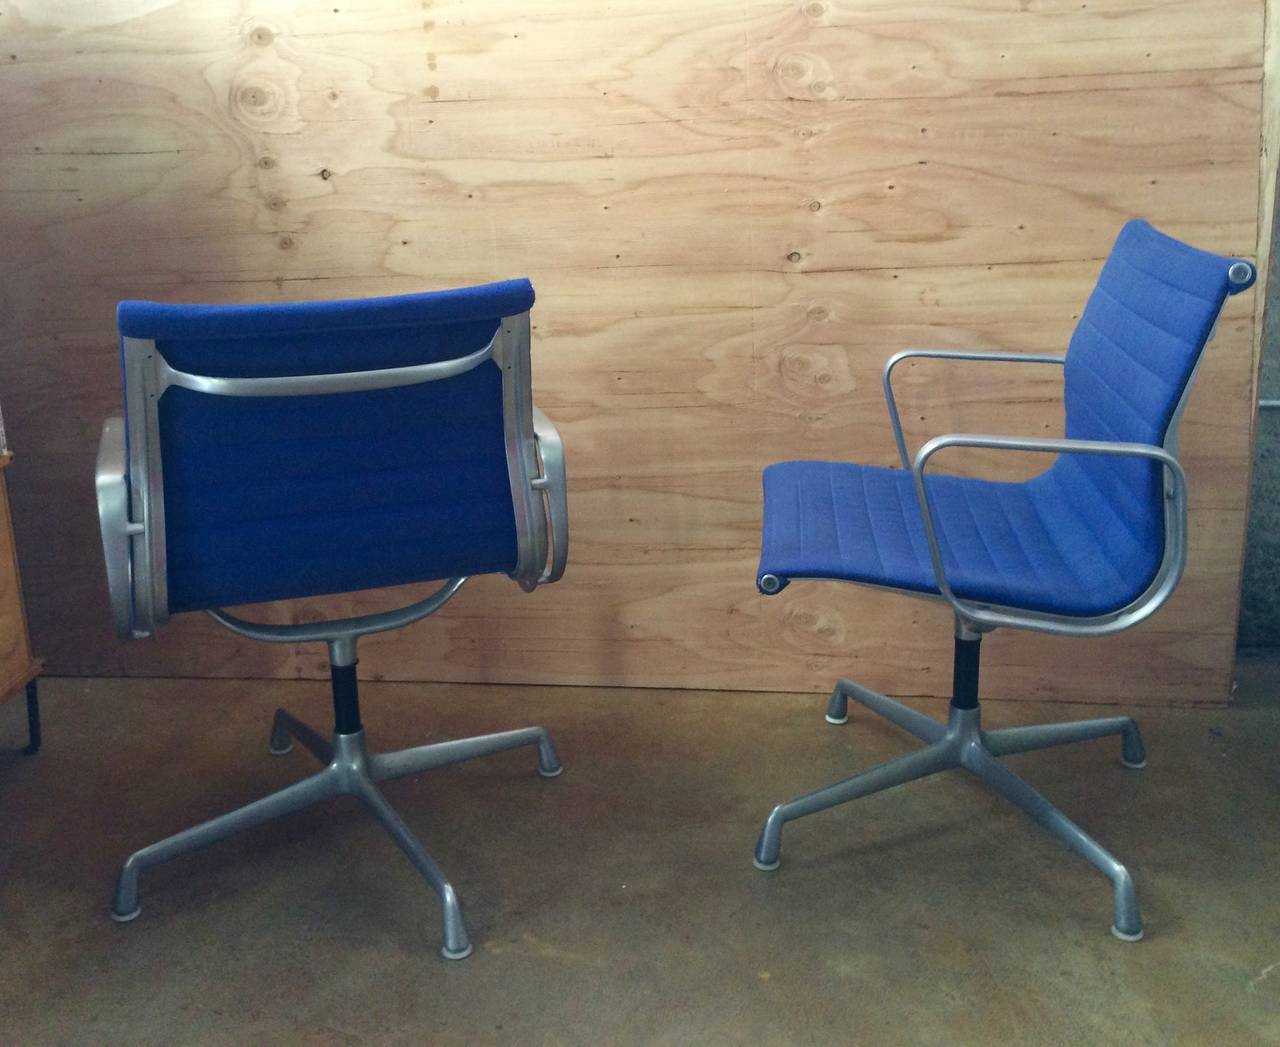 Charles Eames
Pair of Aluminum Group Chairs
Designed 1958, manufactured later
Aluminum frame, blue wool upholstery
Plastic removed from aluminum, one minor scuff on arm, one minor tear in upholstery at corner, otherwise fresh and in good